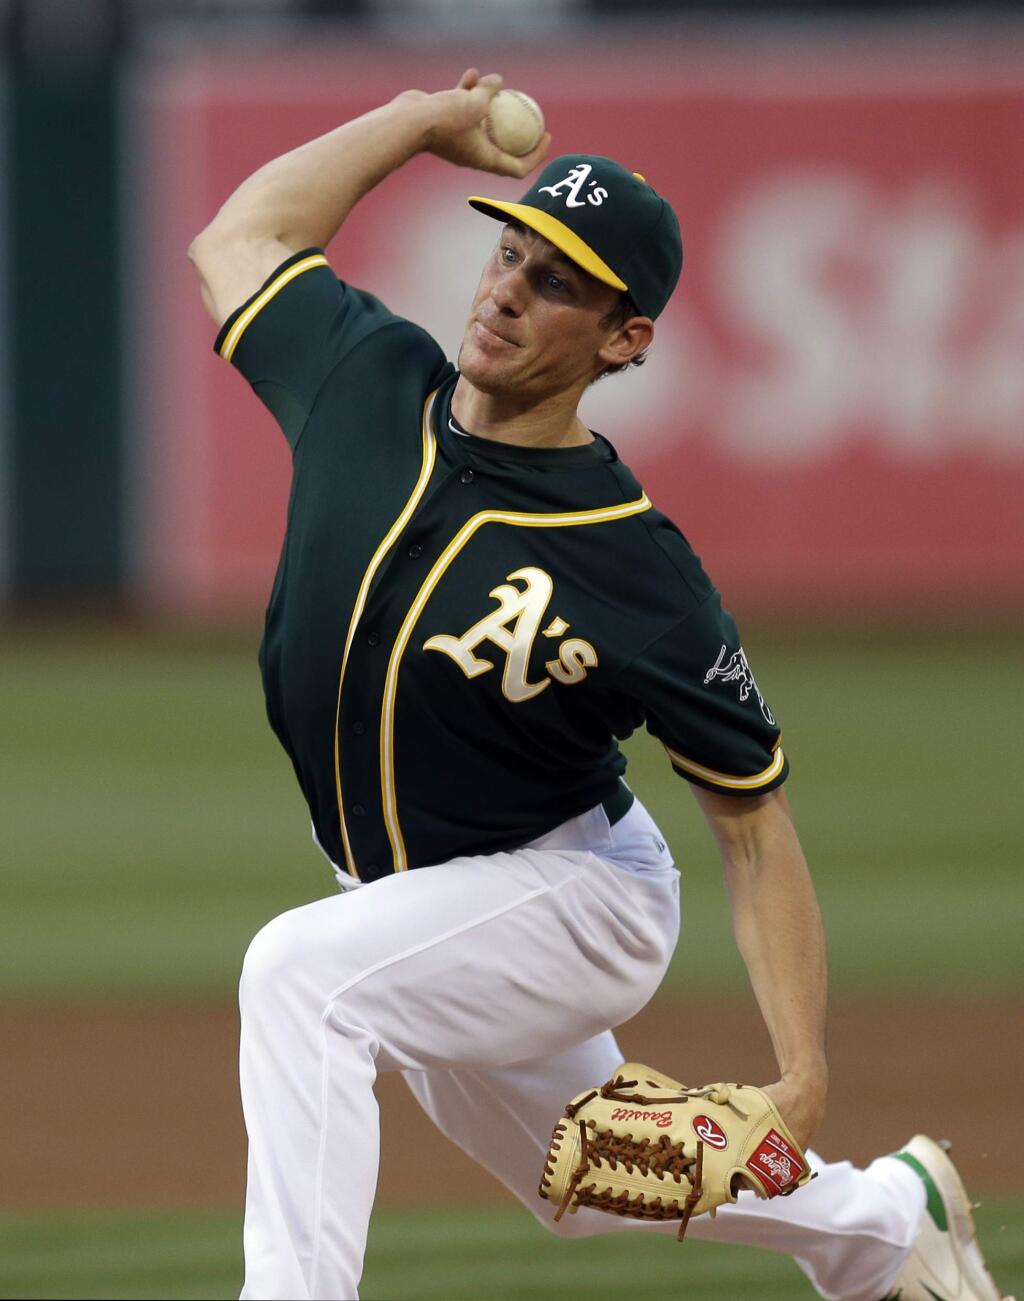 Oakland Athletics' Chris Bassitt works against the Colorado Rockies during the first inning of a baseball game Tuesday, June 30, 2015, in Oakland, Calif. (AP Photo/Ben Margot)